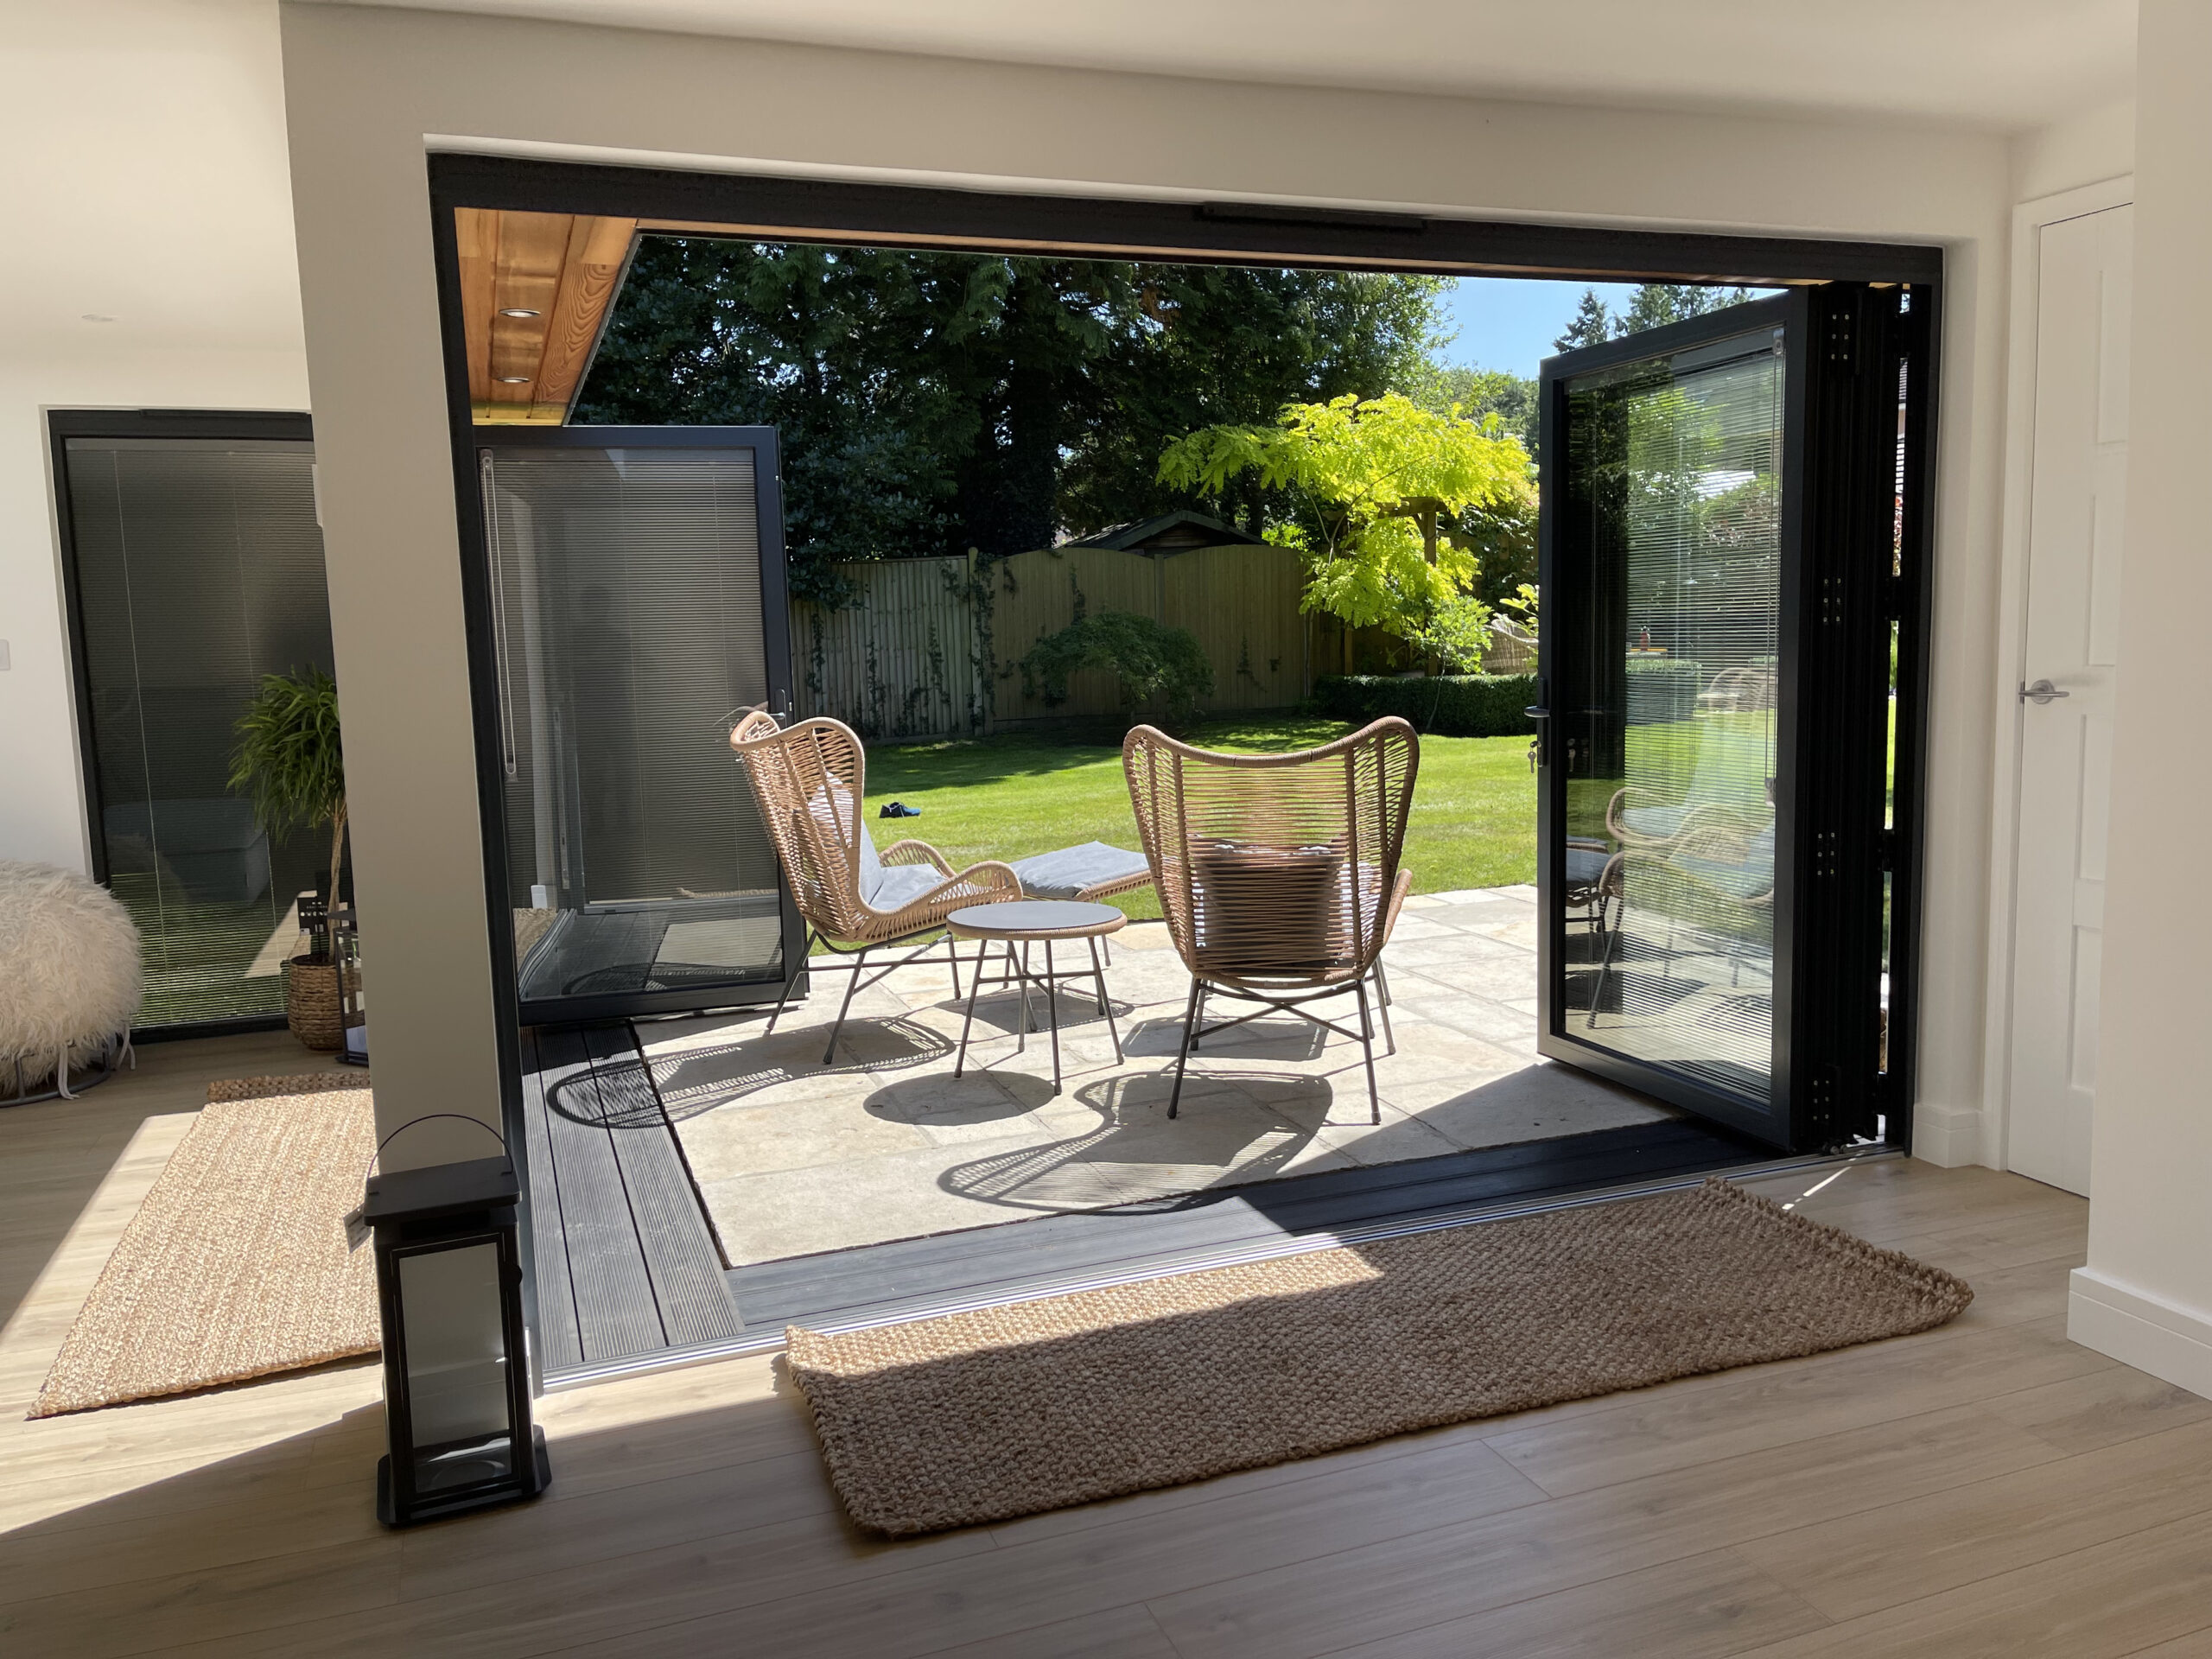 Interior view of a Vivid Green furnished L-shaped garden room with open anthracite grey aluminium bi-fold doors, wooden floors with rugs, and outdoor tiled patio with garden furniture overlooking a sunny grass lawn.